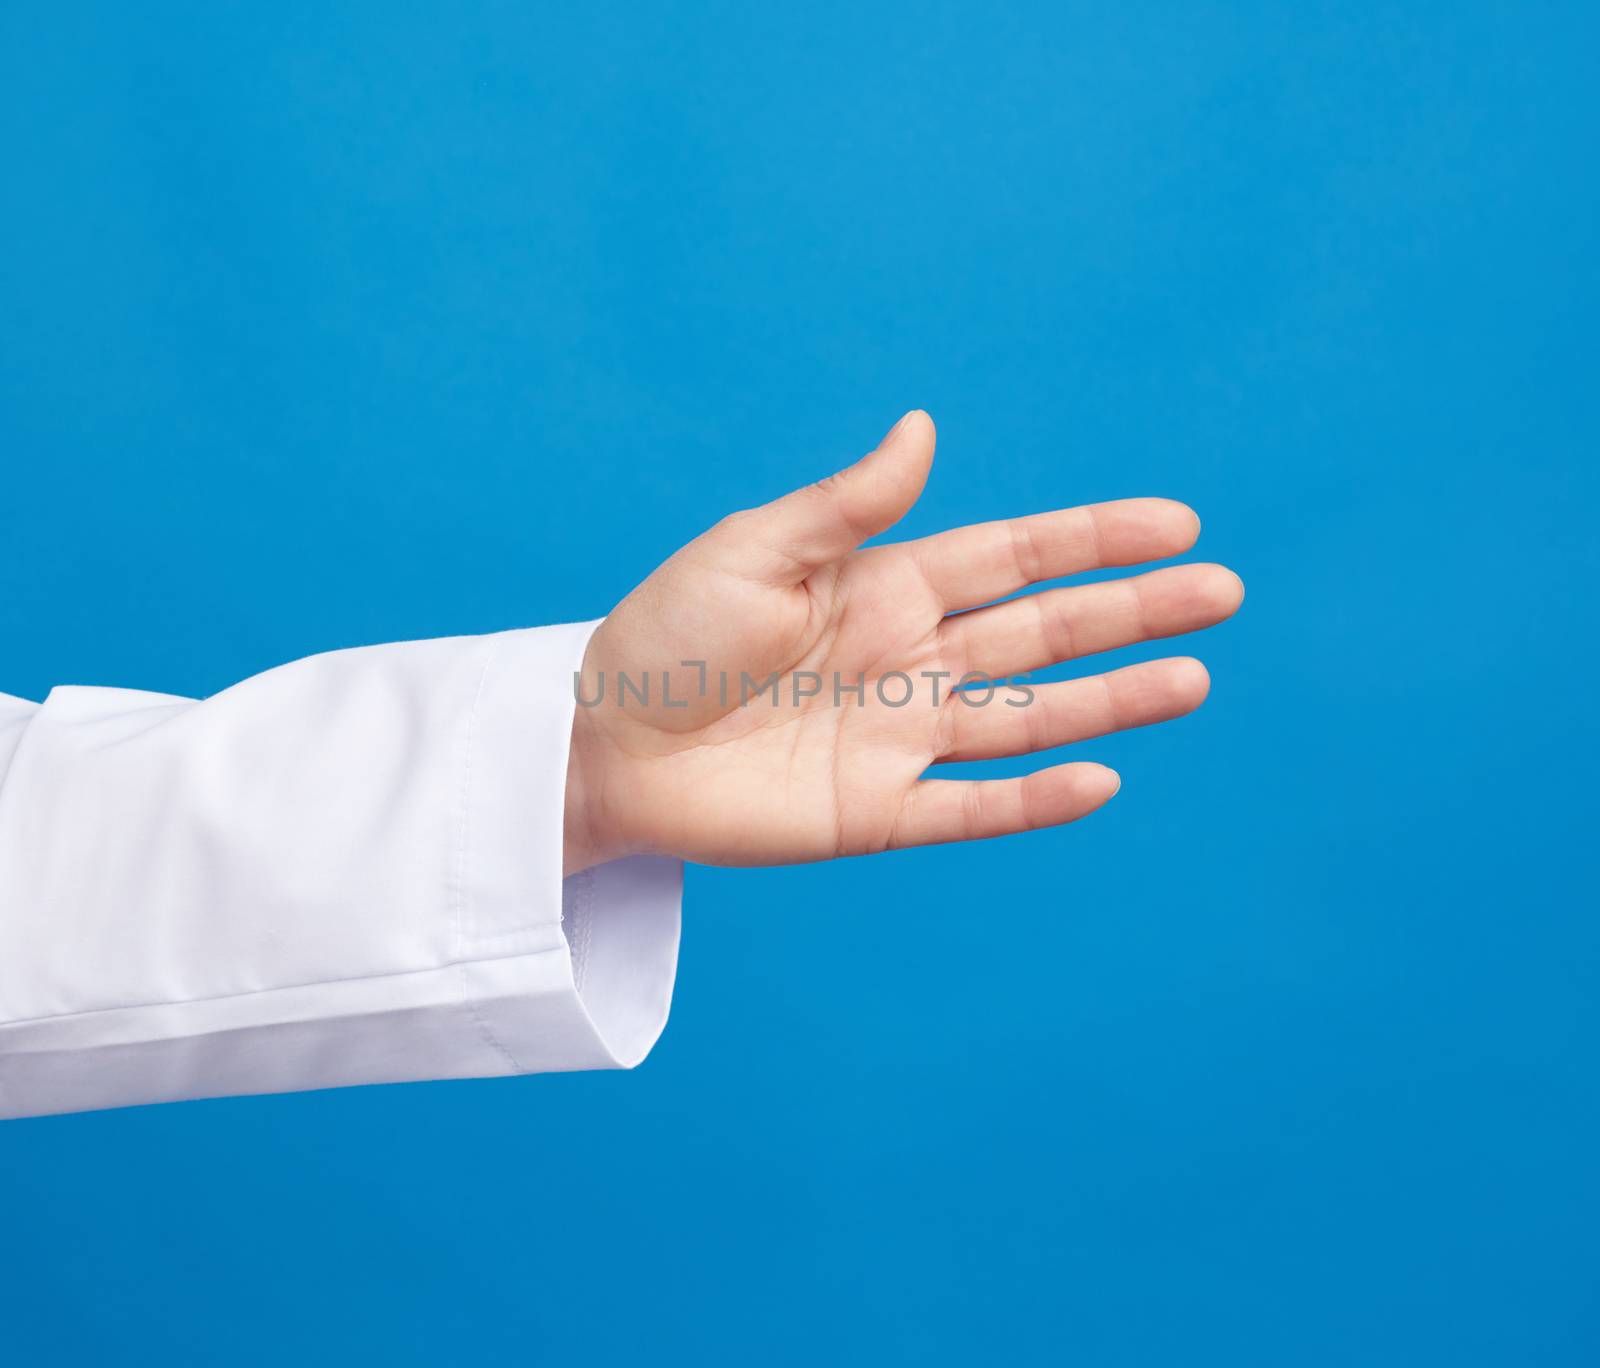 medic in a white coat pulls his hand for a handshake on a blue background, close up